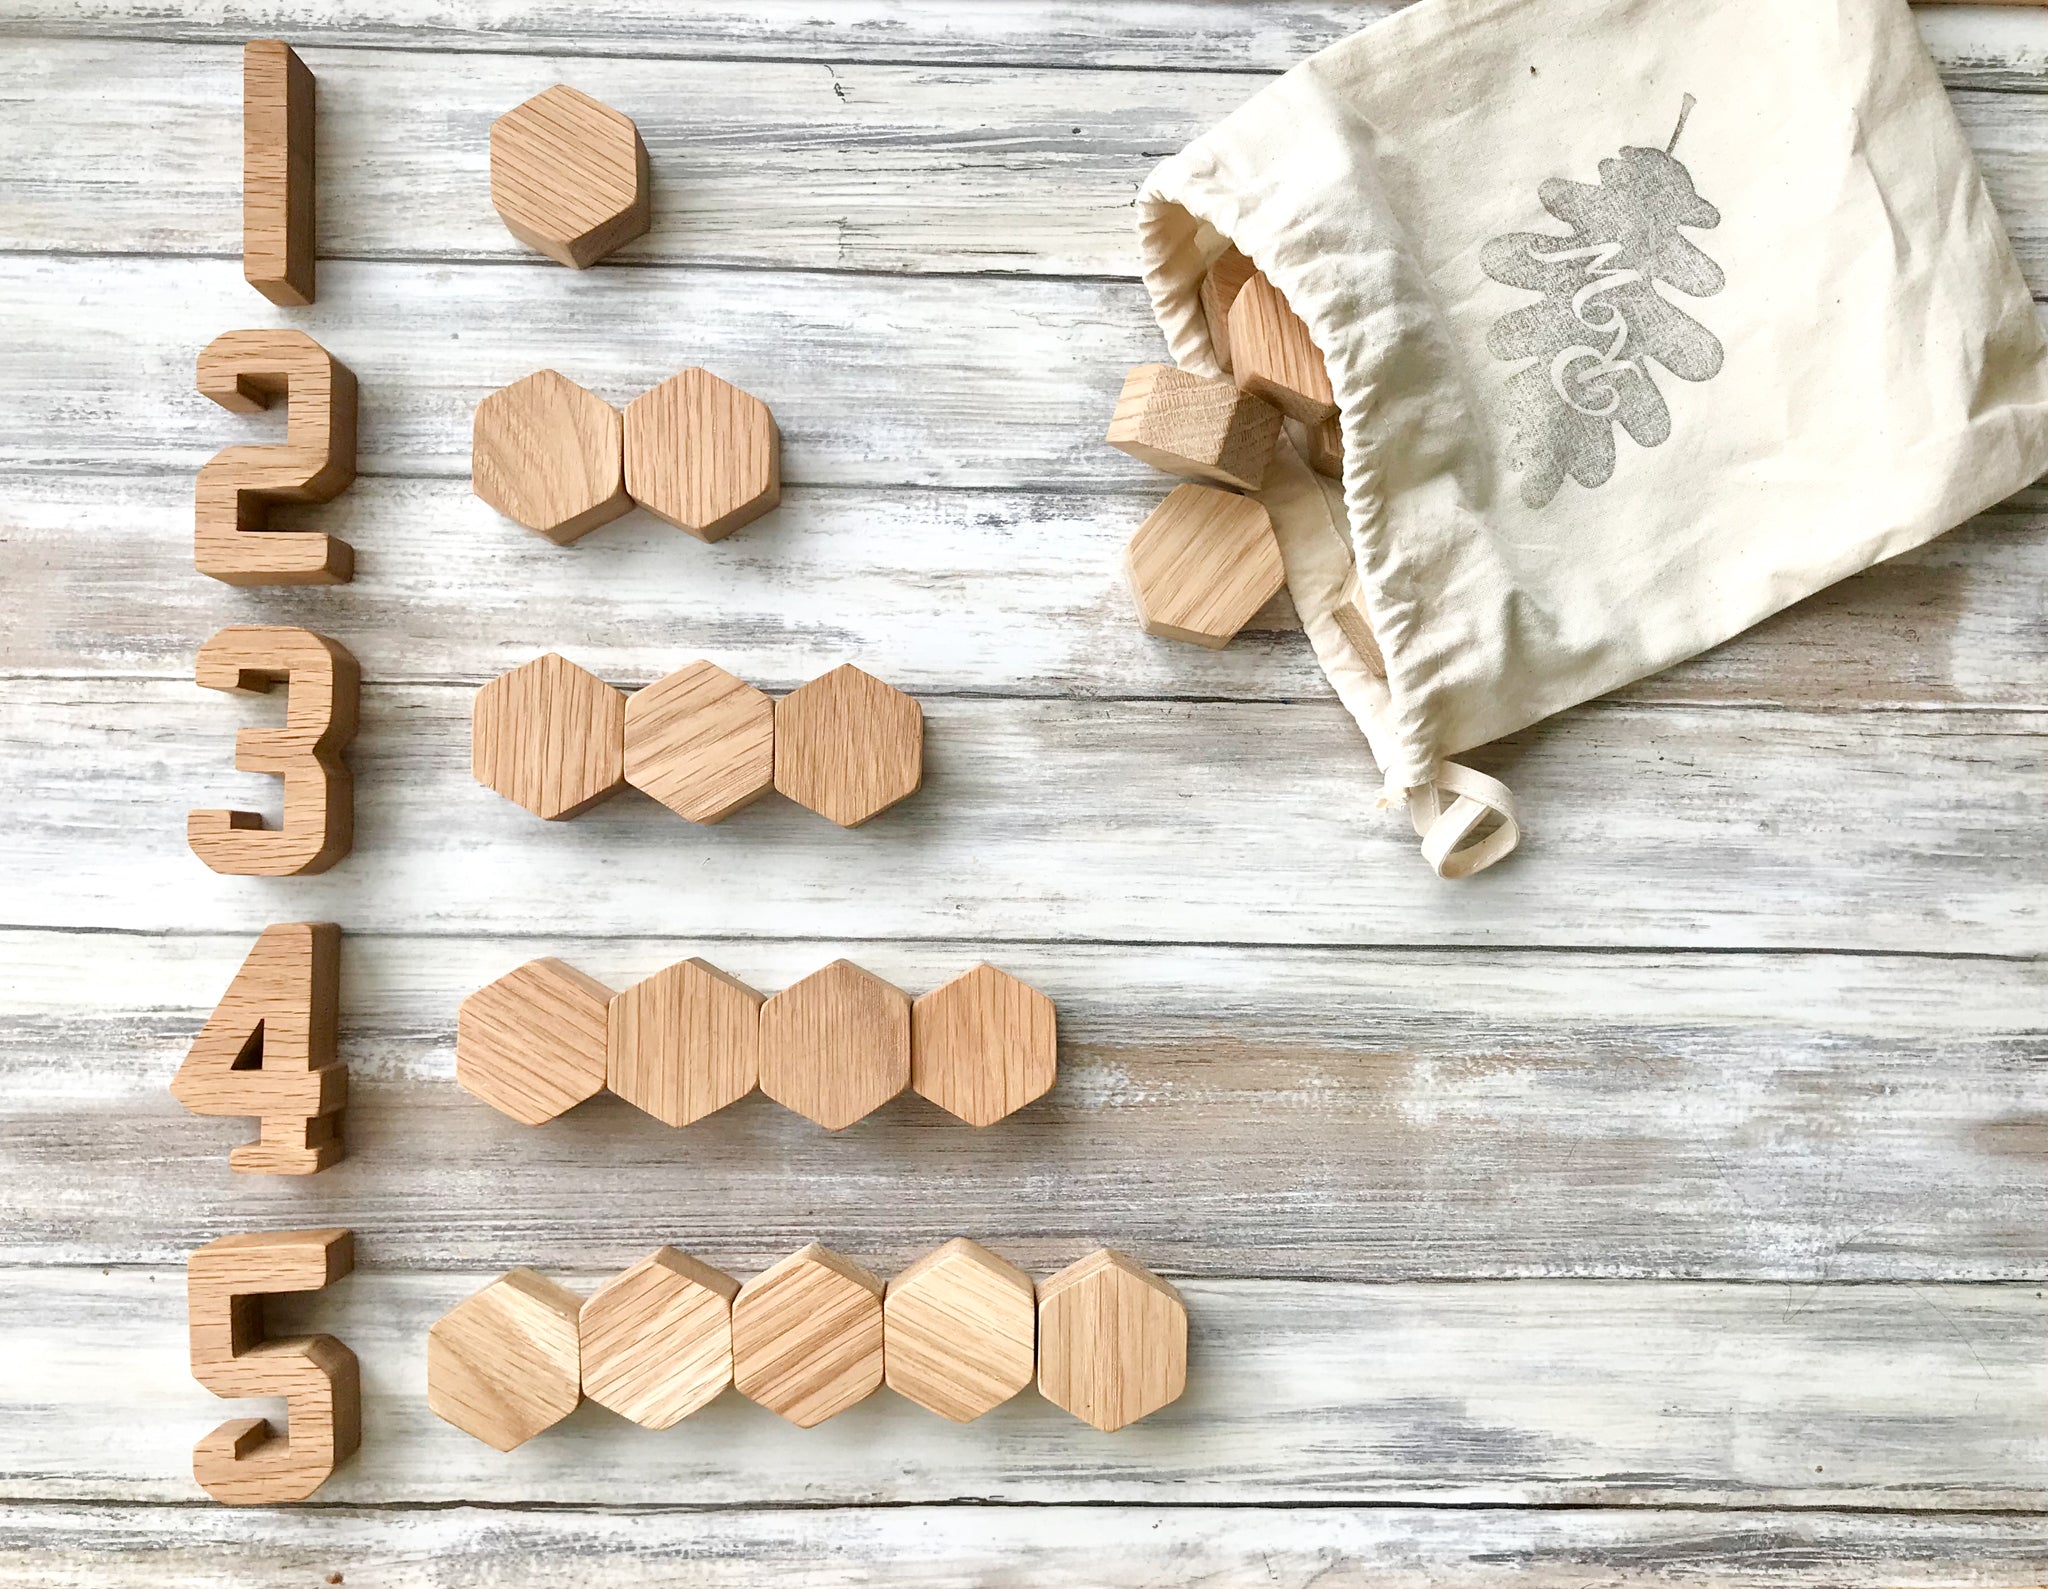 Wooden oak small hexagon blocks tipped out of a cotton bag onto a wooden floor. Wooden numbers arranged 1-5 with hex blocks next to each number with the corresponding amount